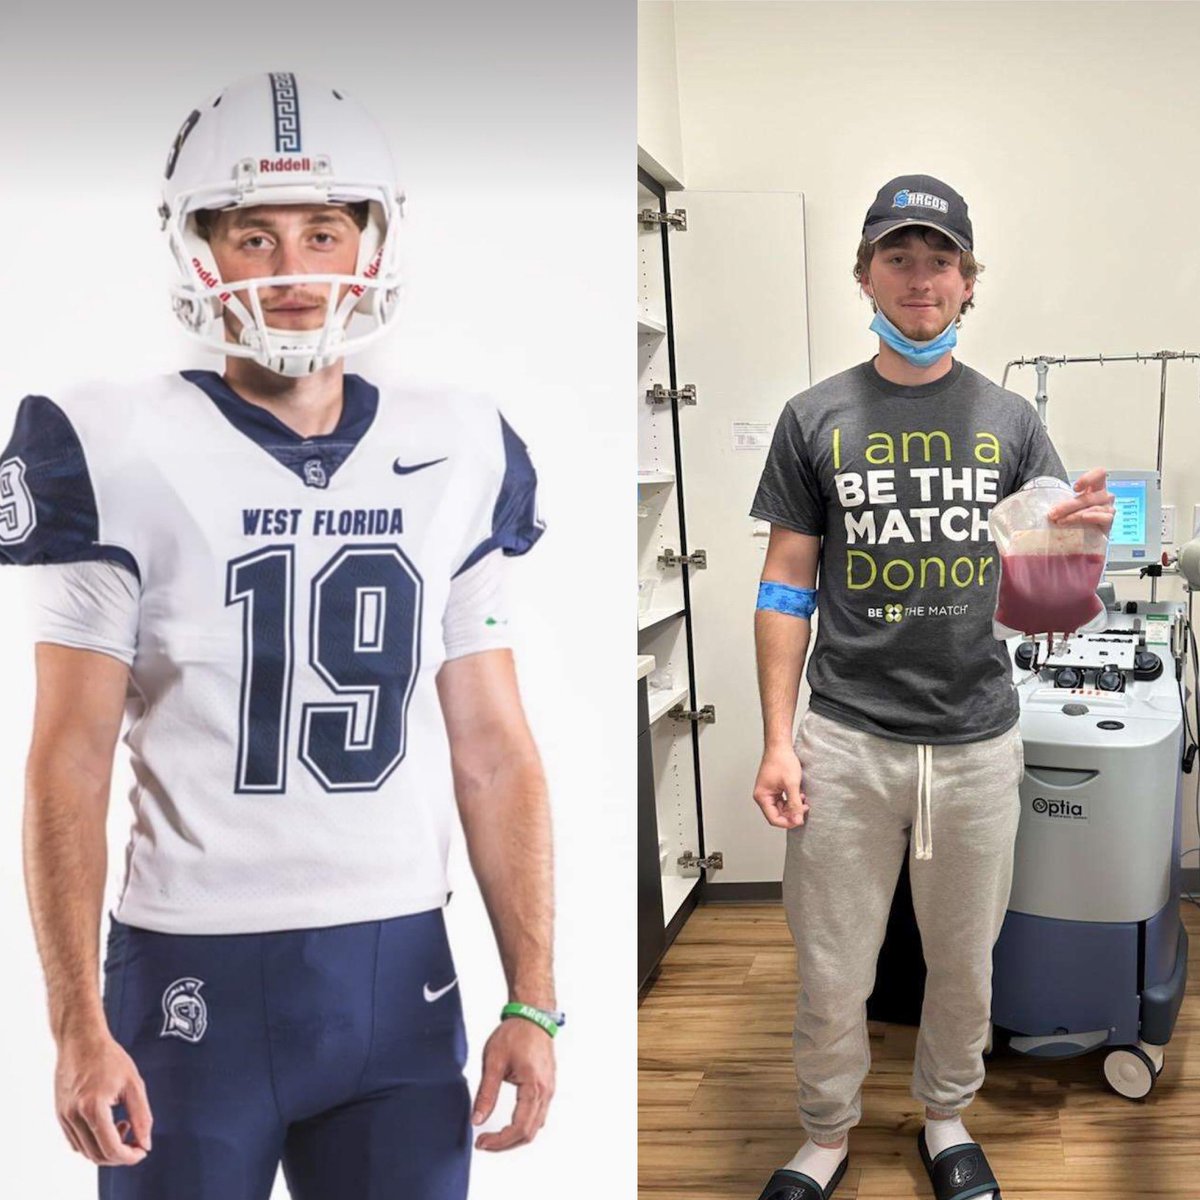 We would like to wrap up @GivingTuesday with the greatest of gifts! Today @UWFFootball @GoArgos @GriffinCerra kicker saved a life by donating his stem cells to a patient in need via @BeTheMatch Thank you Griffin and good luck this weekend!